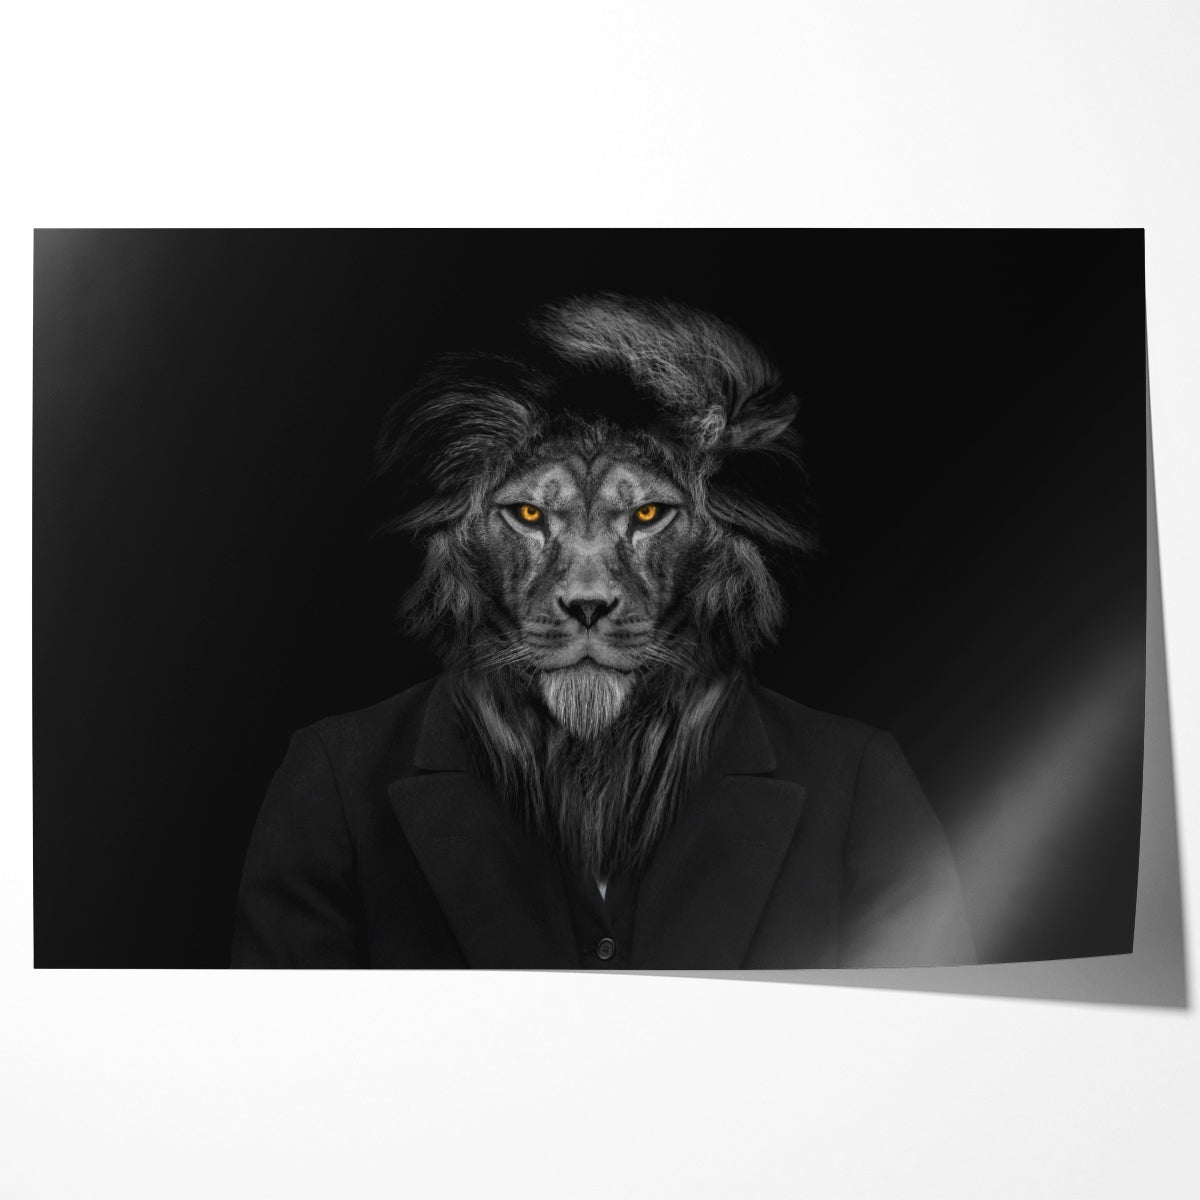 Black and White Lion Portrait in Suit Modern Art Poster Print-Horizontal Posters NOT FRAMED-CetArt-10″x8″ inches-CetArt